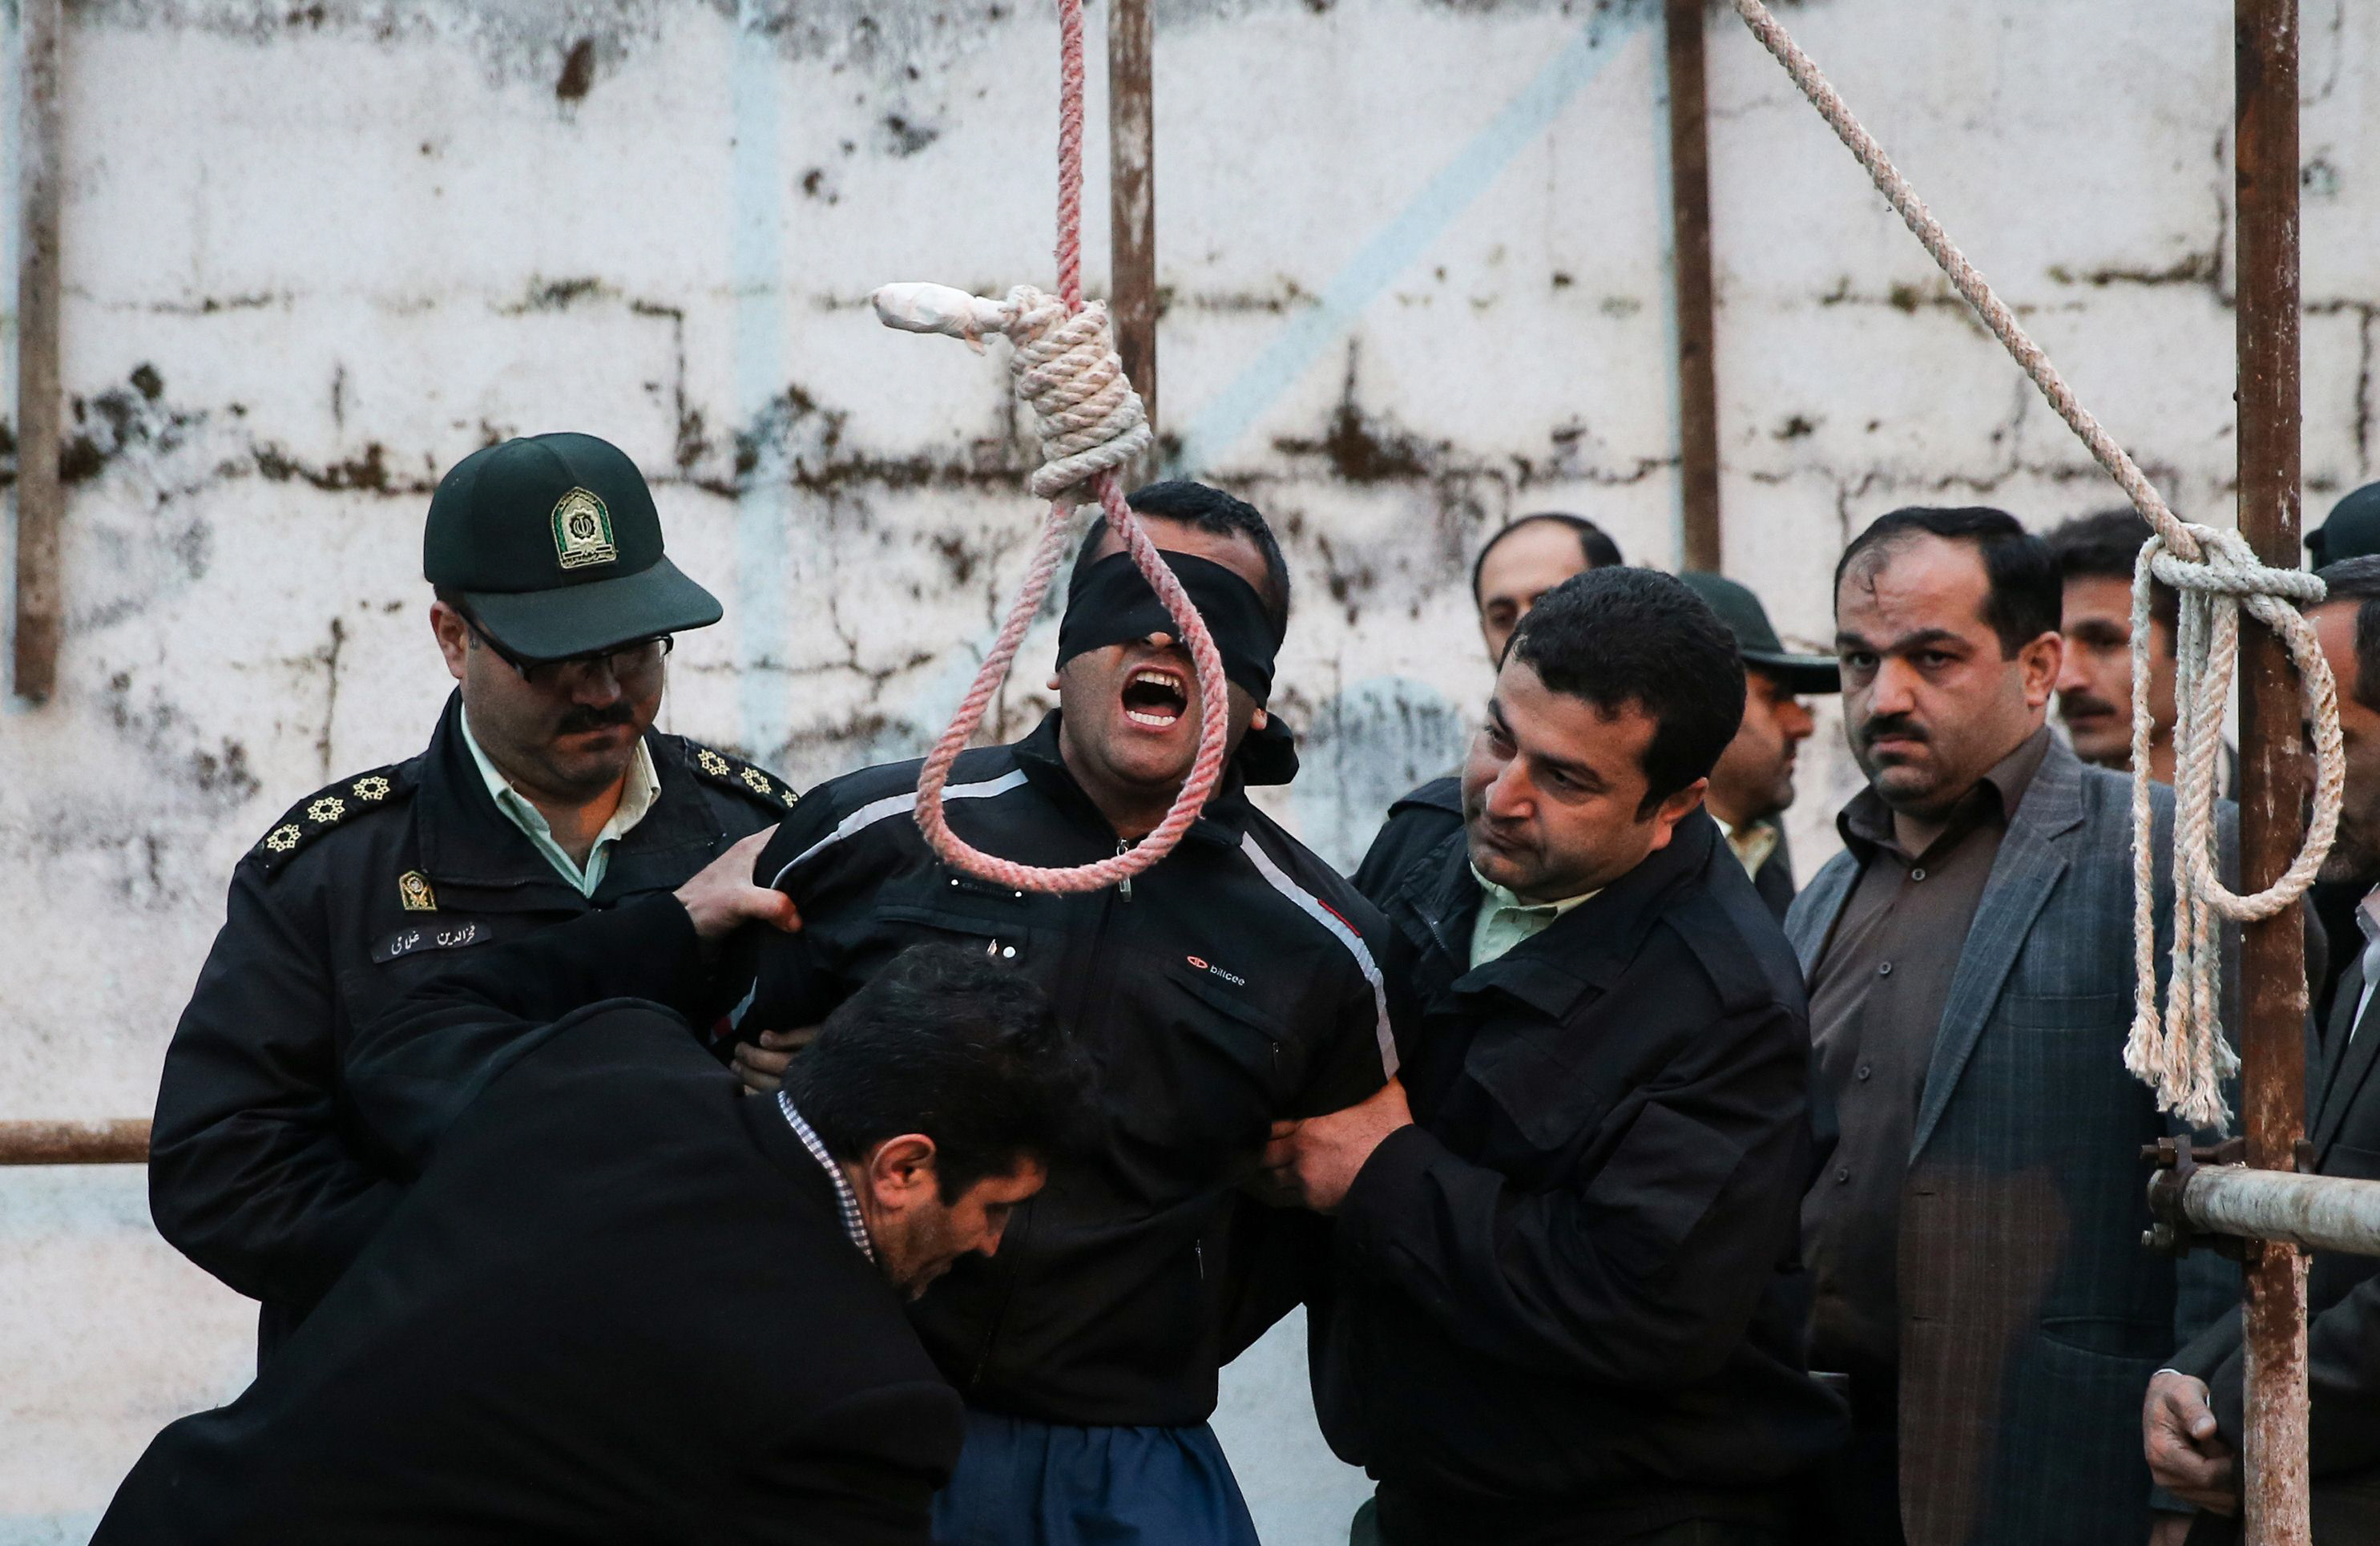 balal who killed an iranian youth abdolah hosseinzadeh in a street fight with a knife in 2007 is brought to the gallows during his execution ceremony in the northern city of nowshahr on april 15 2014 the mother of abdolah hosseinzadeh spared the life of balal her son 039 s convicted murderer with an emotional slap in the face as he awaited execution prior to removing the noose around his neck photo afp